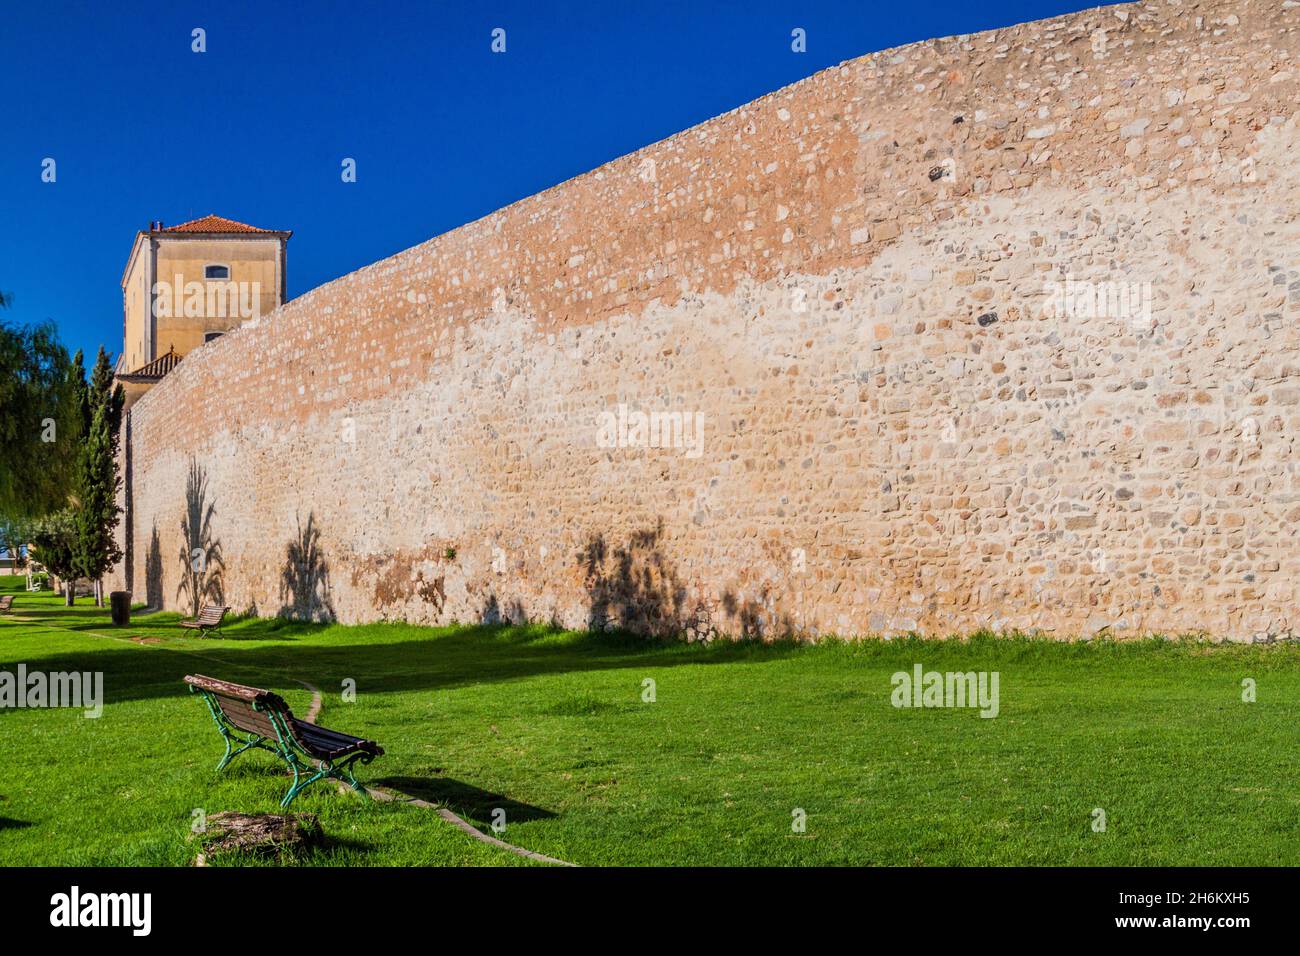 Fortification walls of the Old Town Cidade Velha of Faro, Portugal. Stock Photo